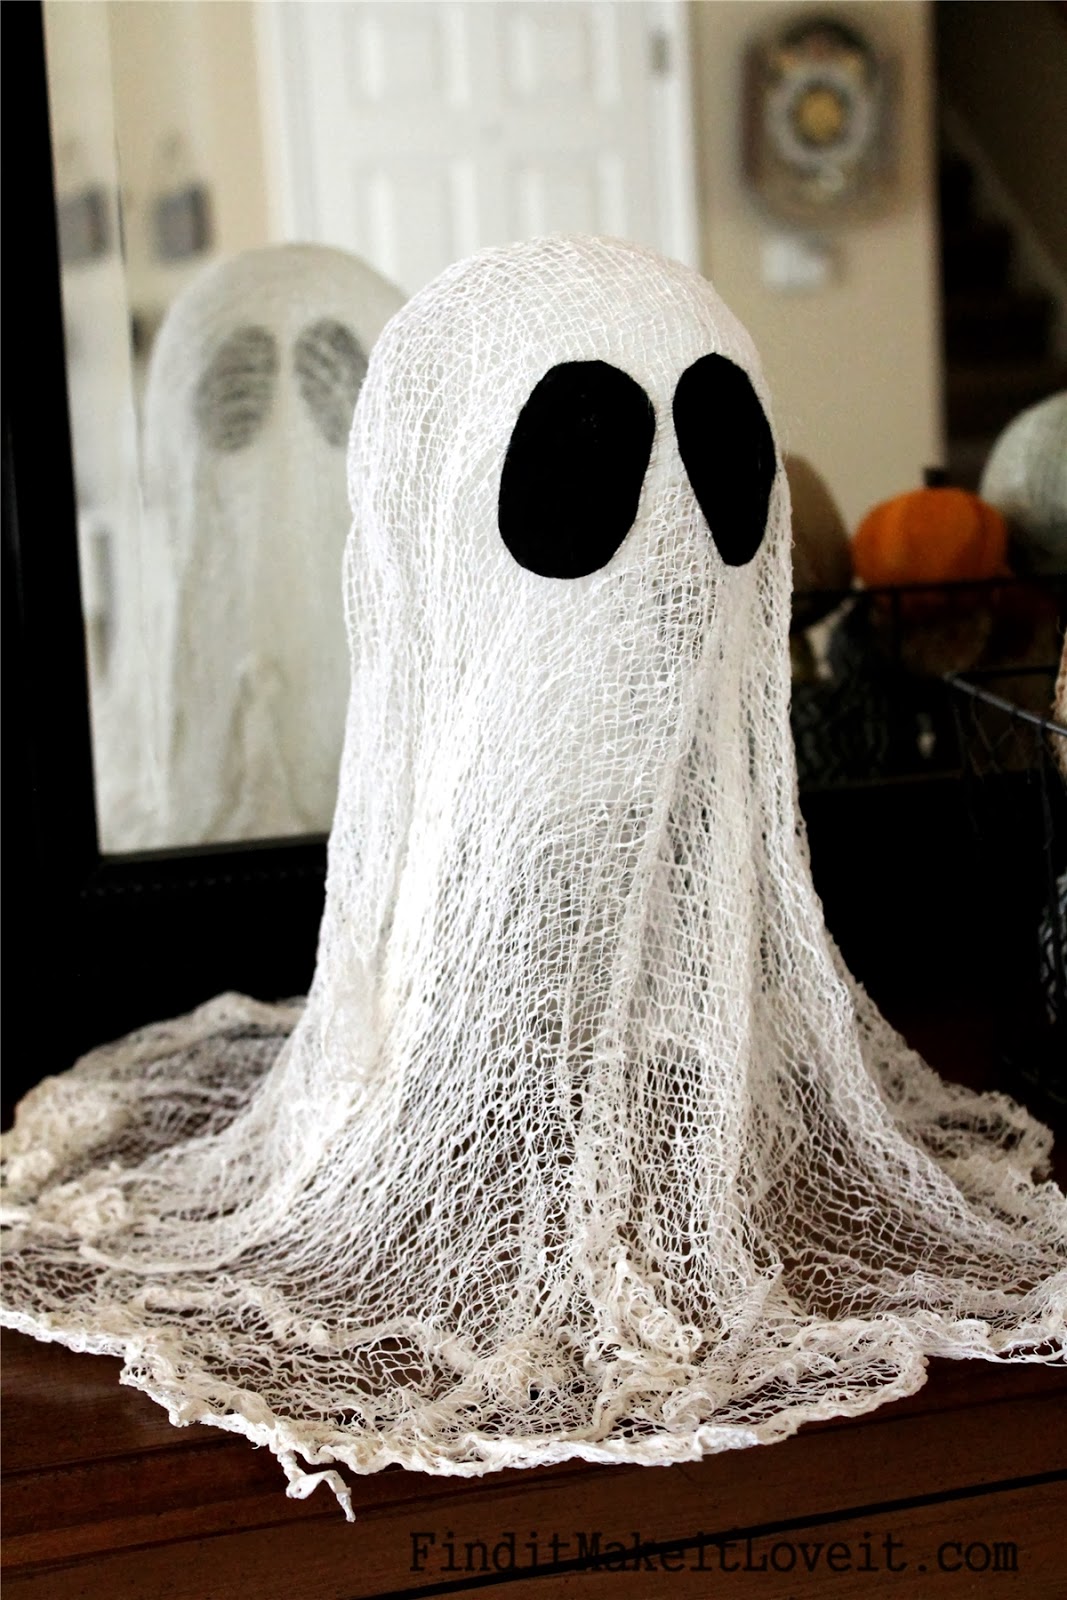 Batty Wall & Cheesecloth ghosts - Find it, Make it, Love it